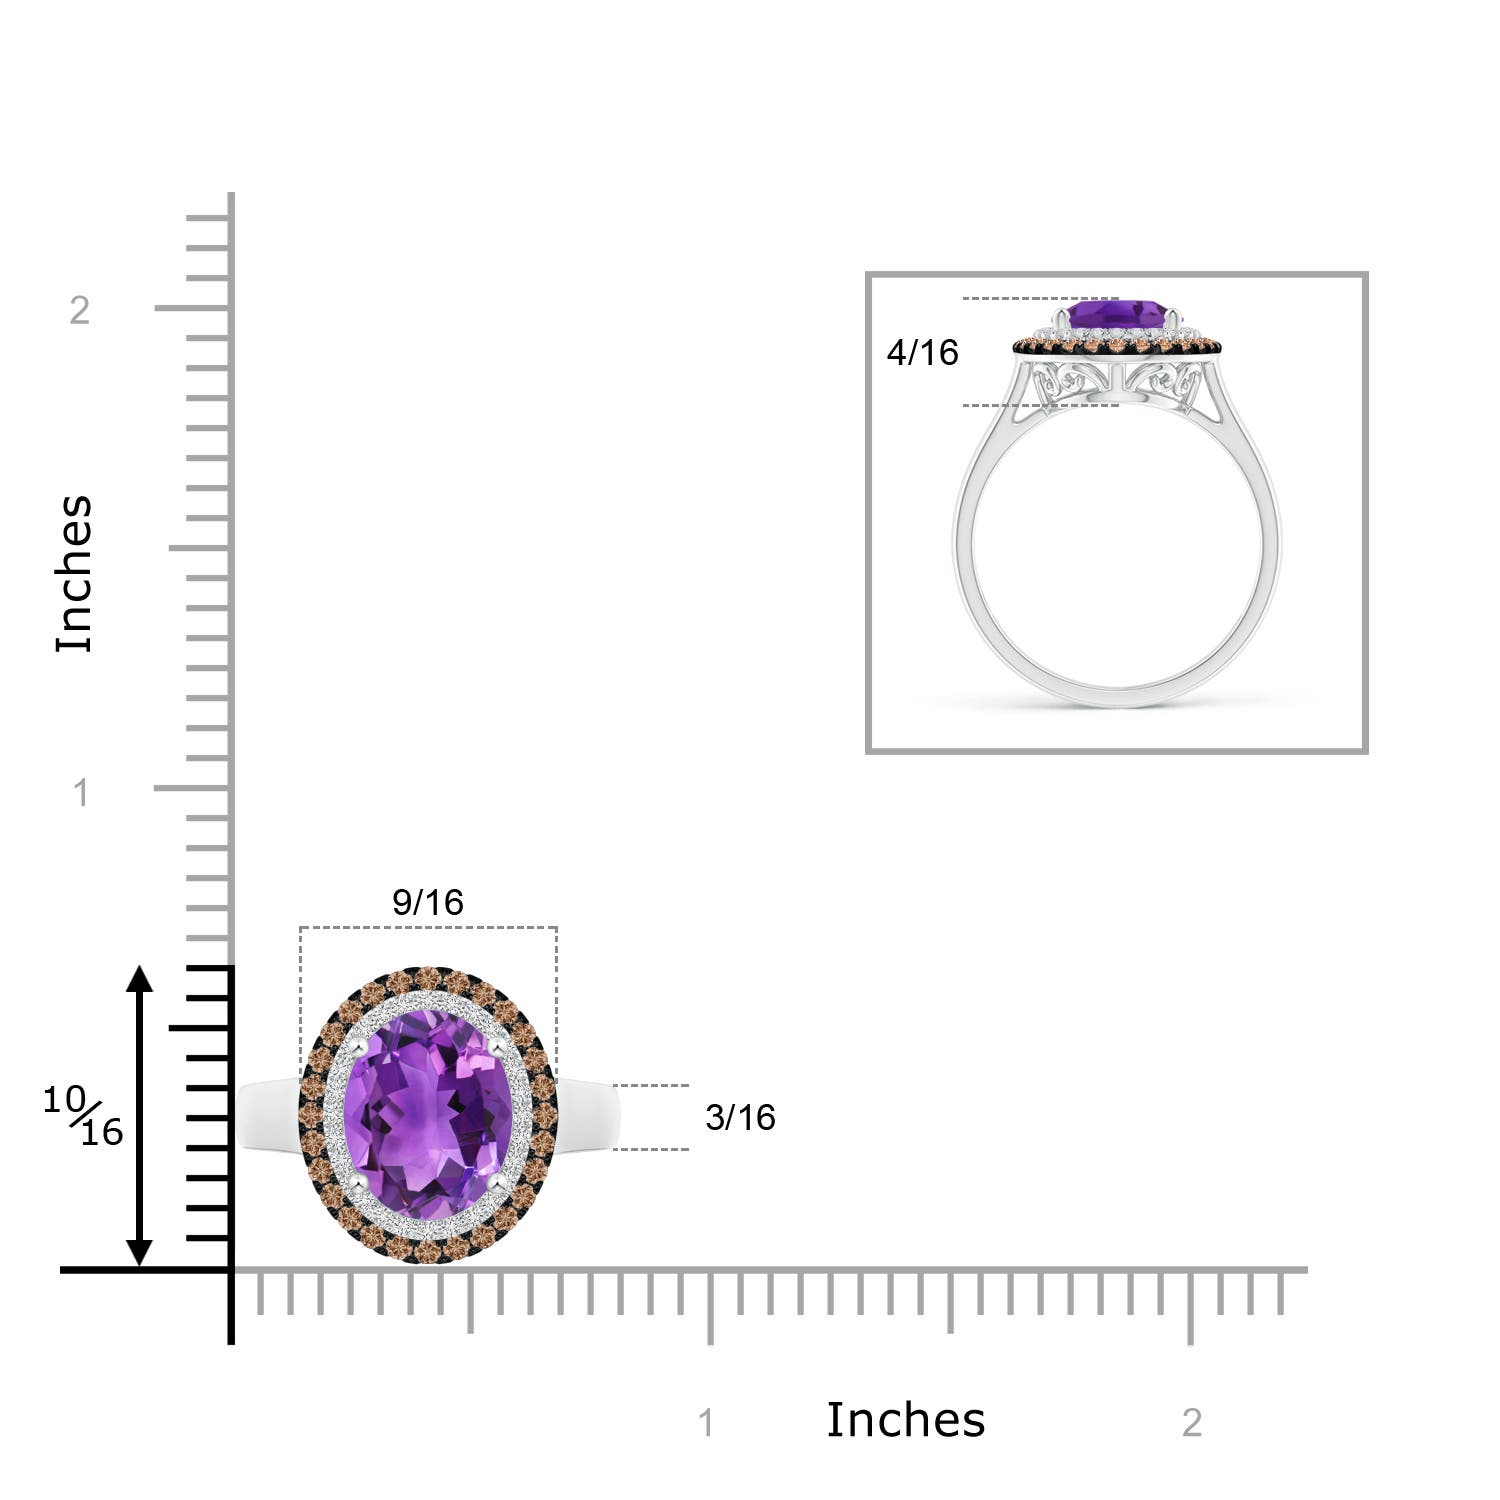 AAA - Amethyst / 3.71 CT / 14 KT White Gold